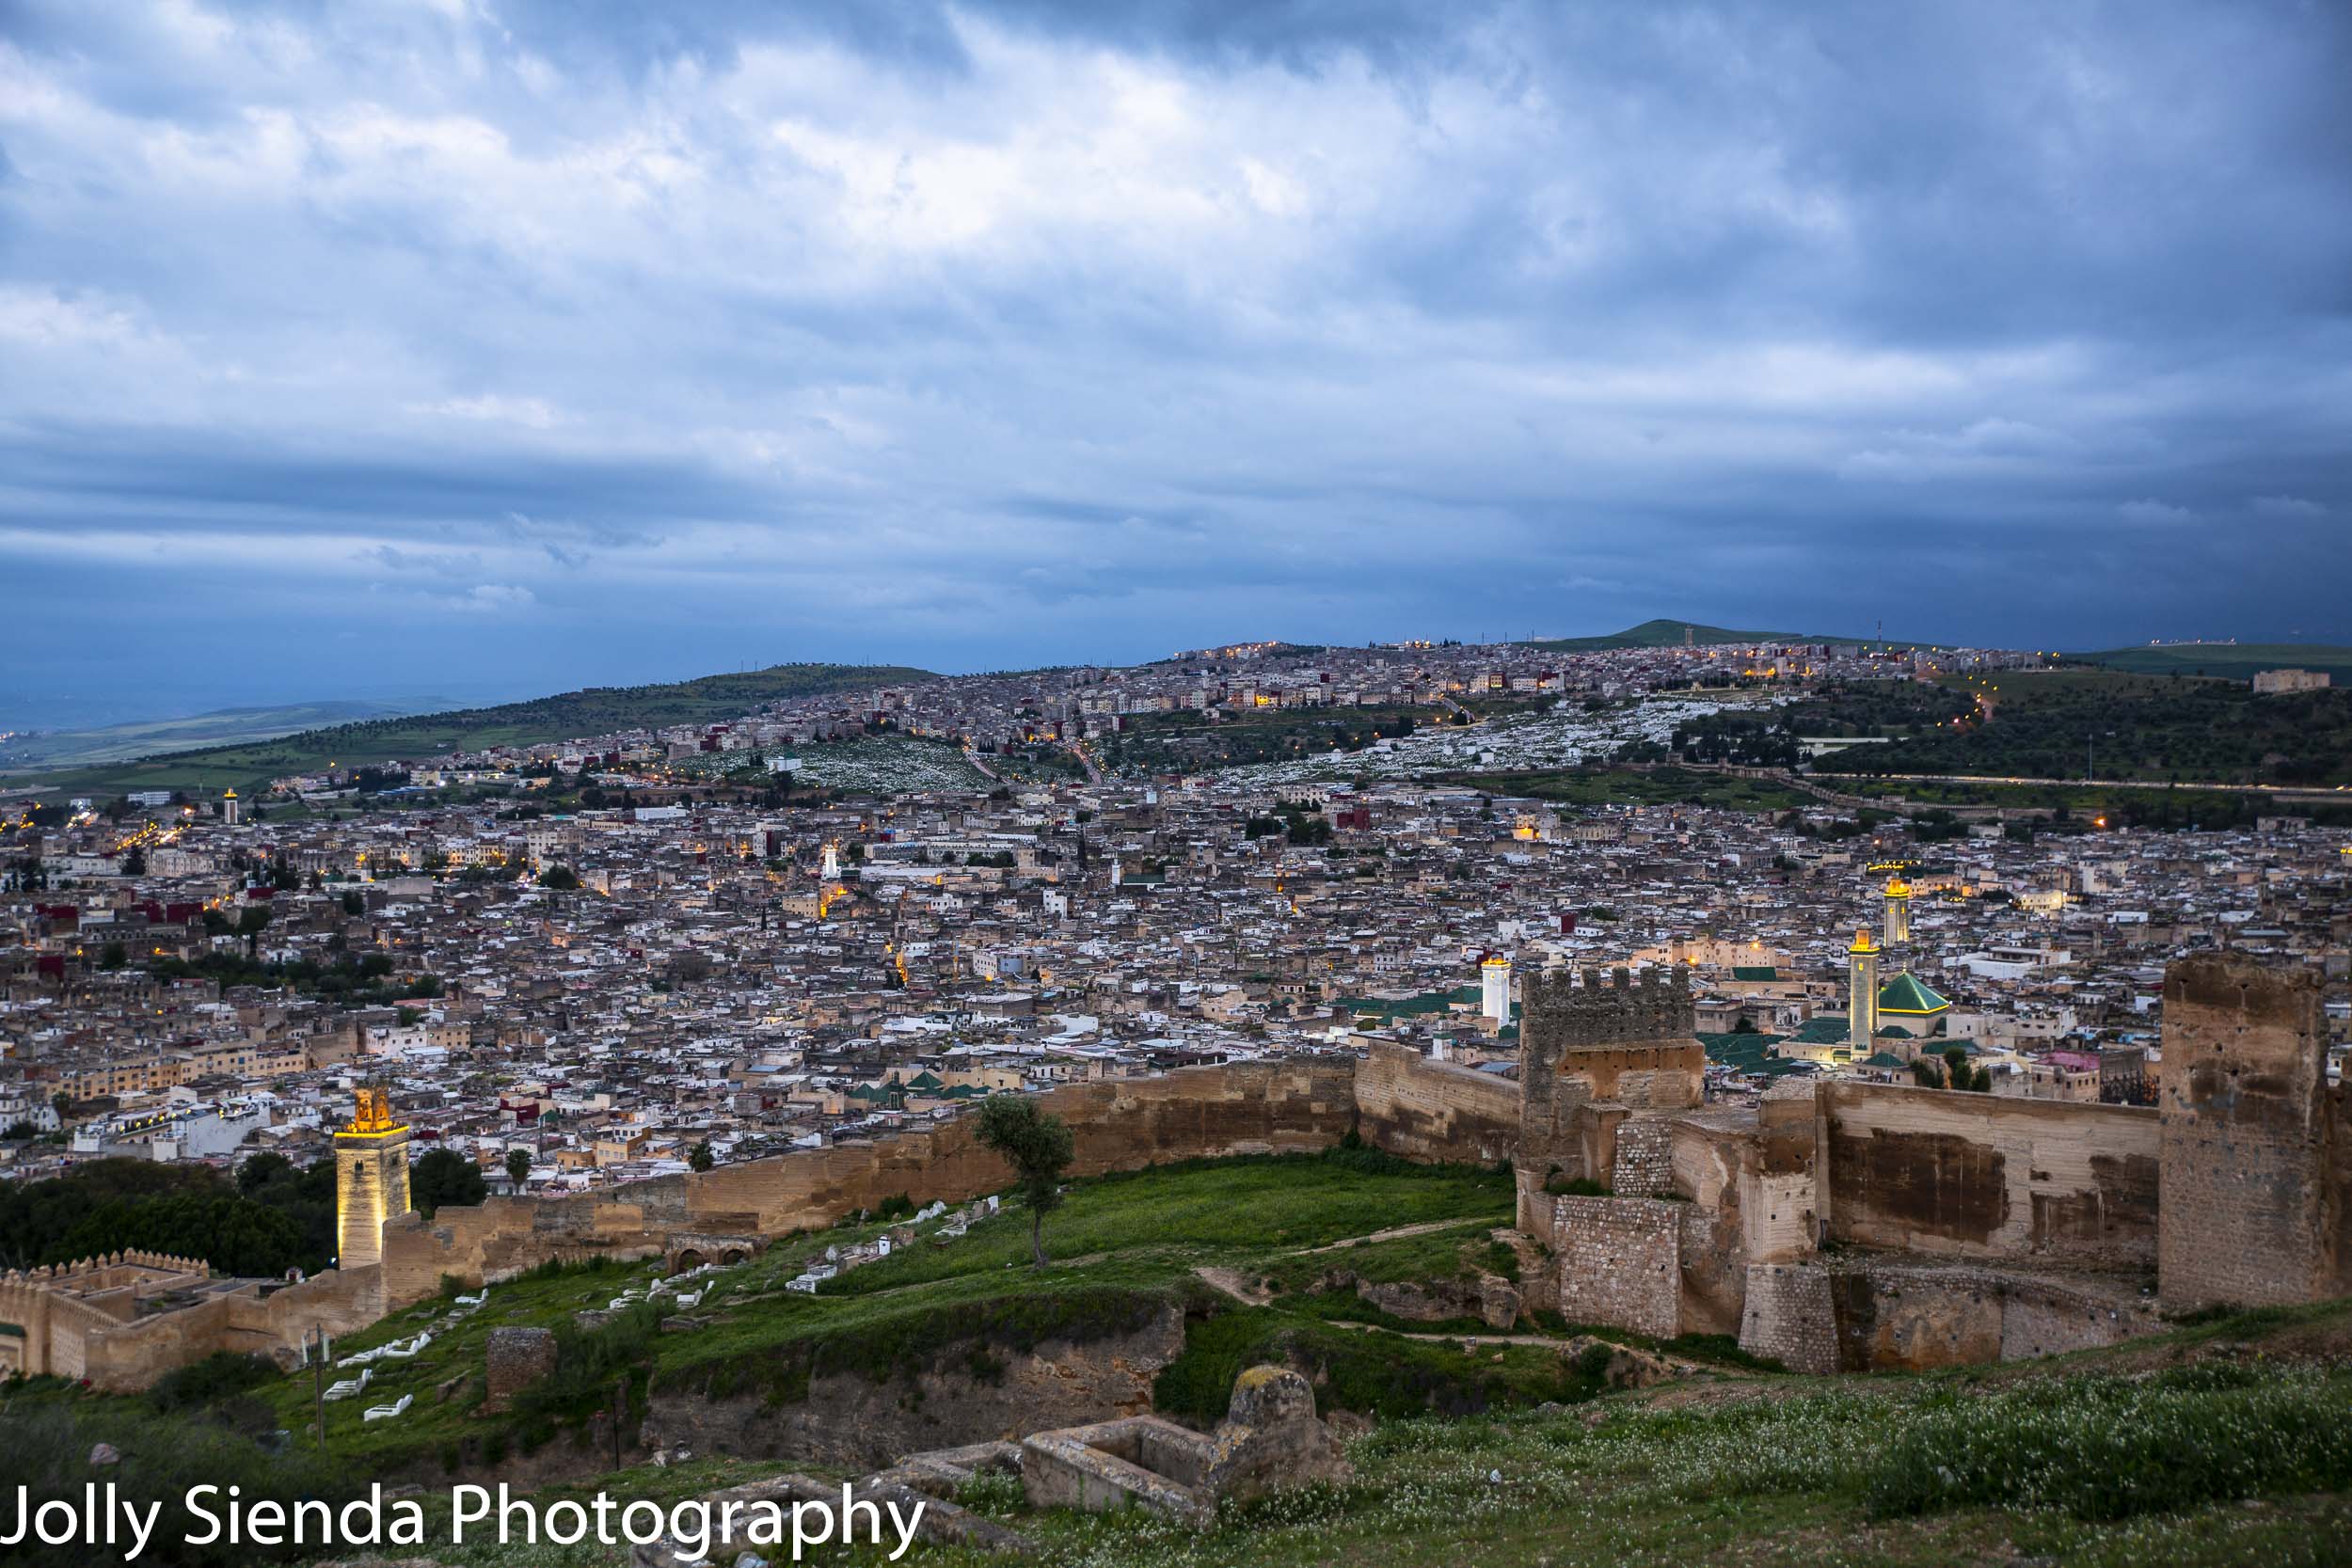 Lights of the city of Fez at dusk